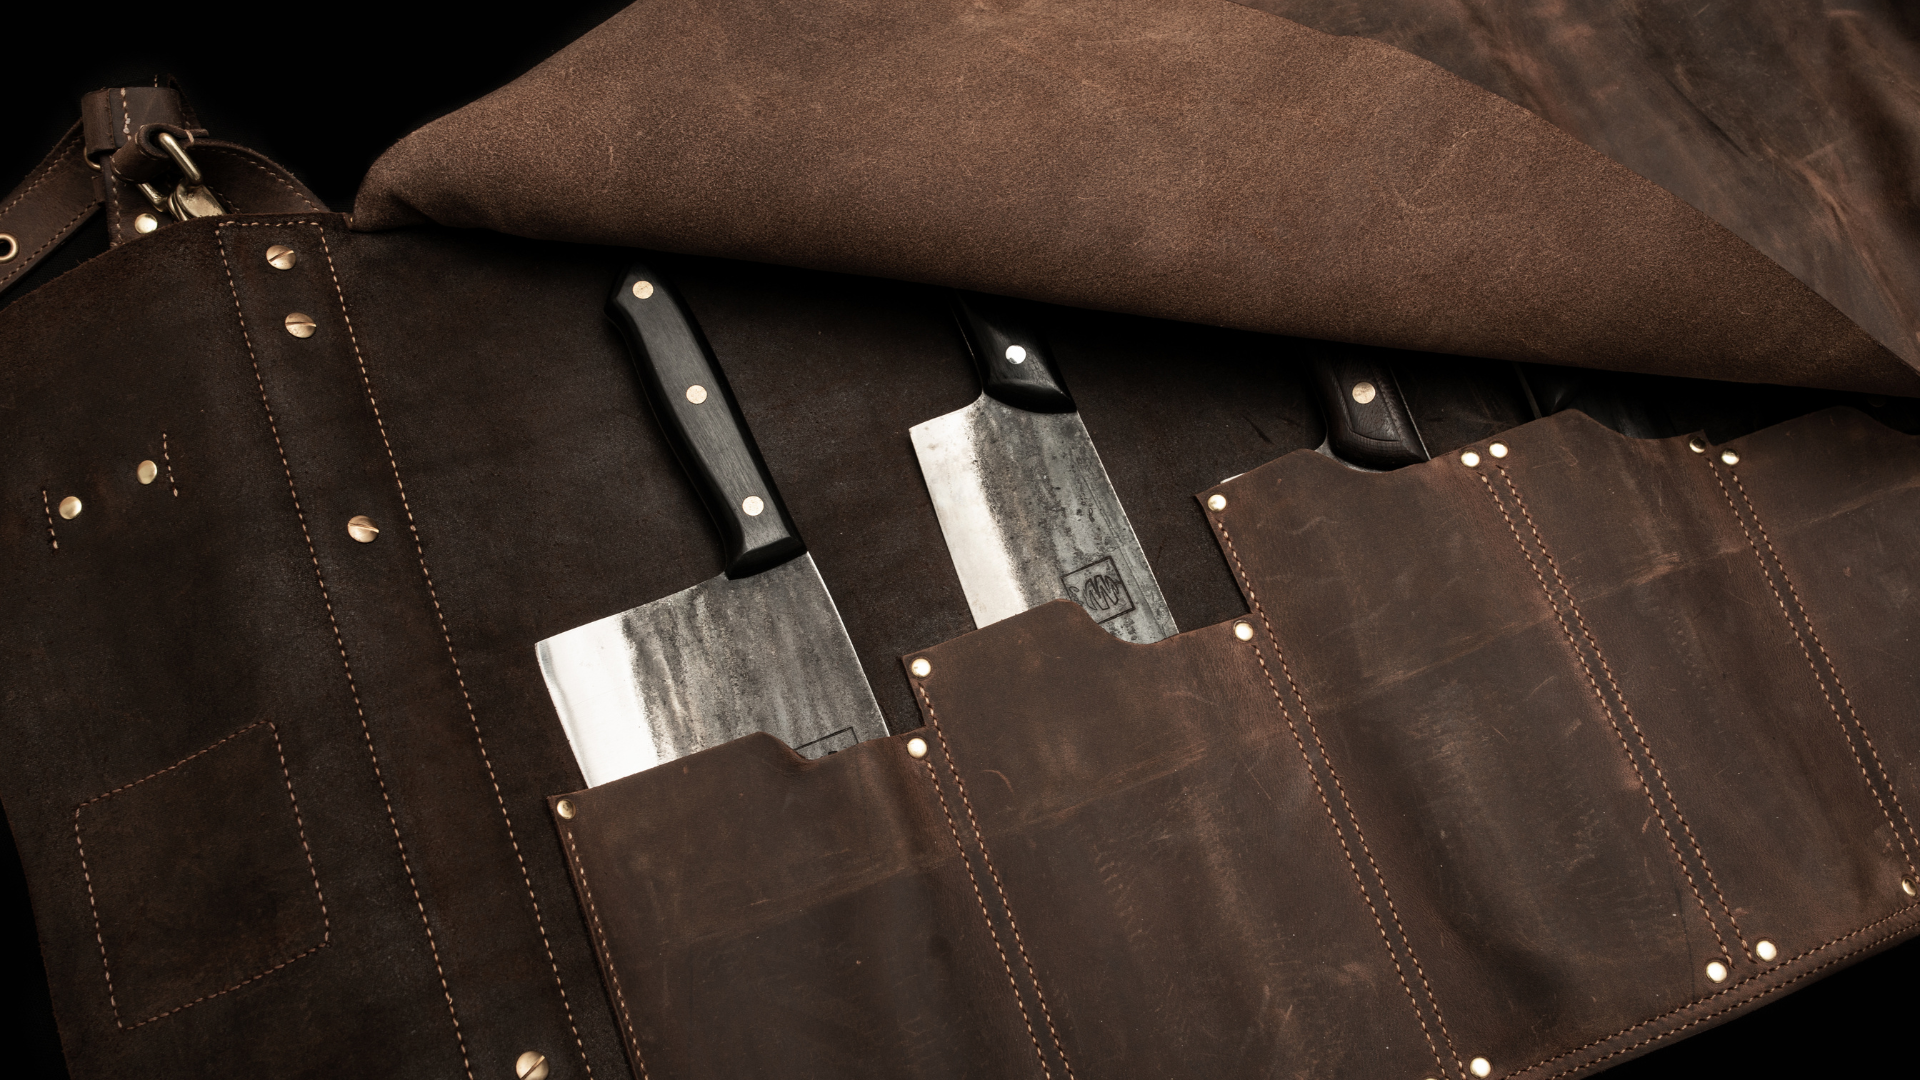 Keep Your Handmade Steel Knives Safe and Stunning: 4 Tips for Displaying and Storing Your Collection